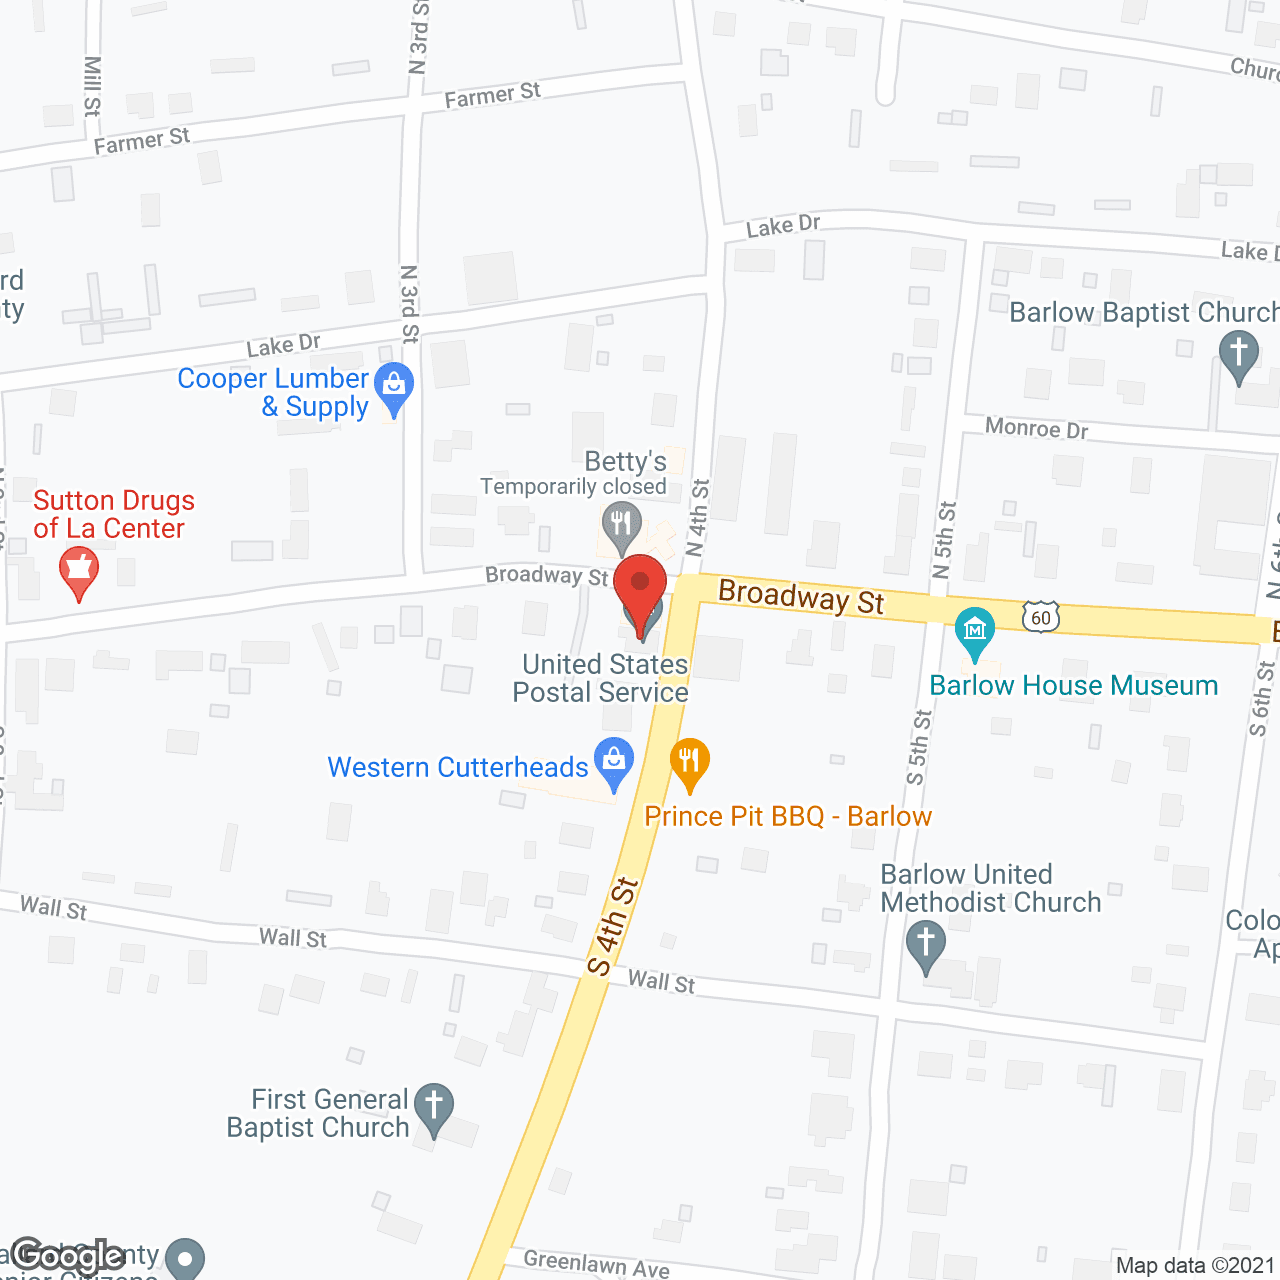 Lourdes Adult Day Svc in google map